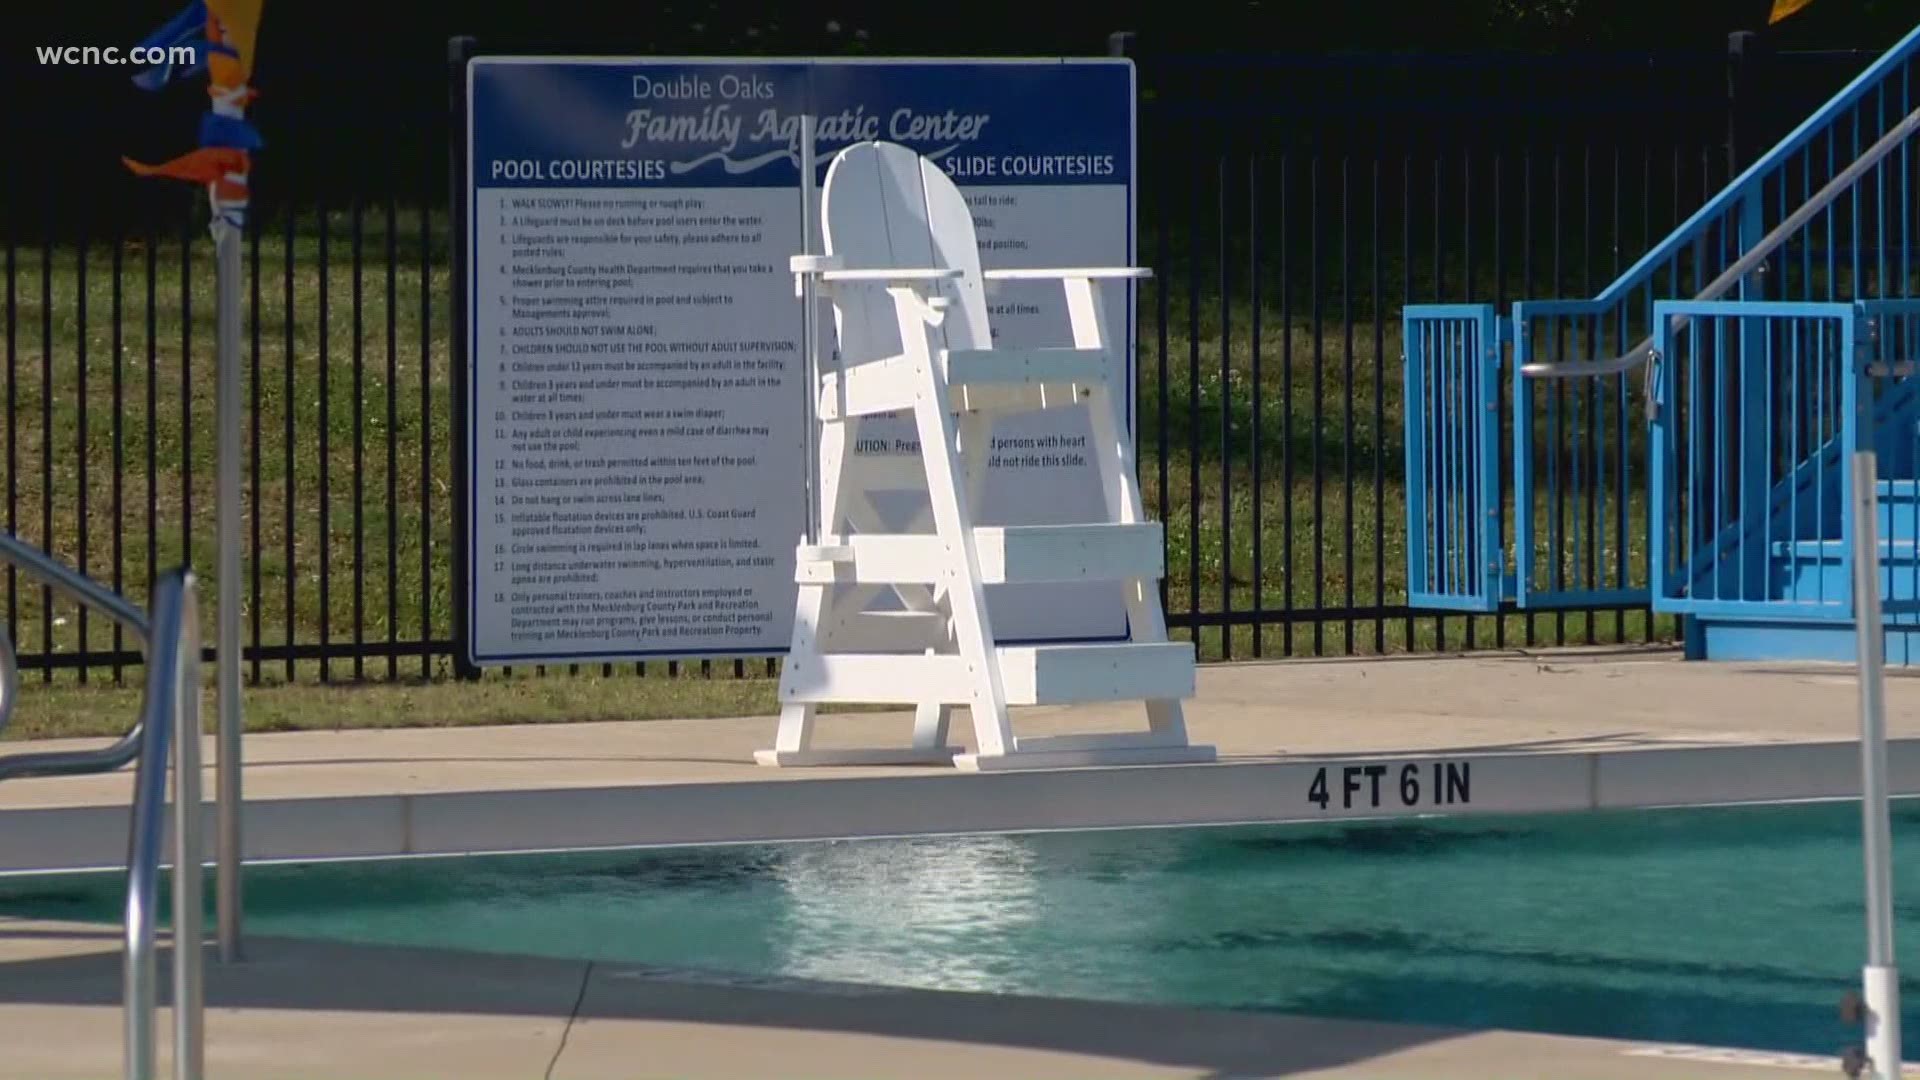 In Mecklenburg County, only 86 of 247 lifeguard positions are filled.